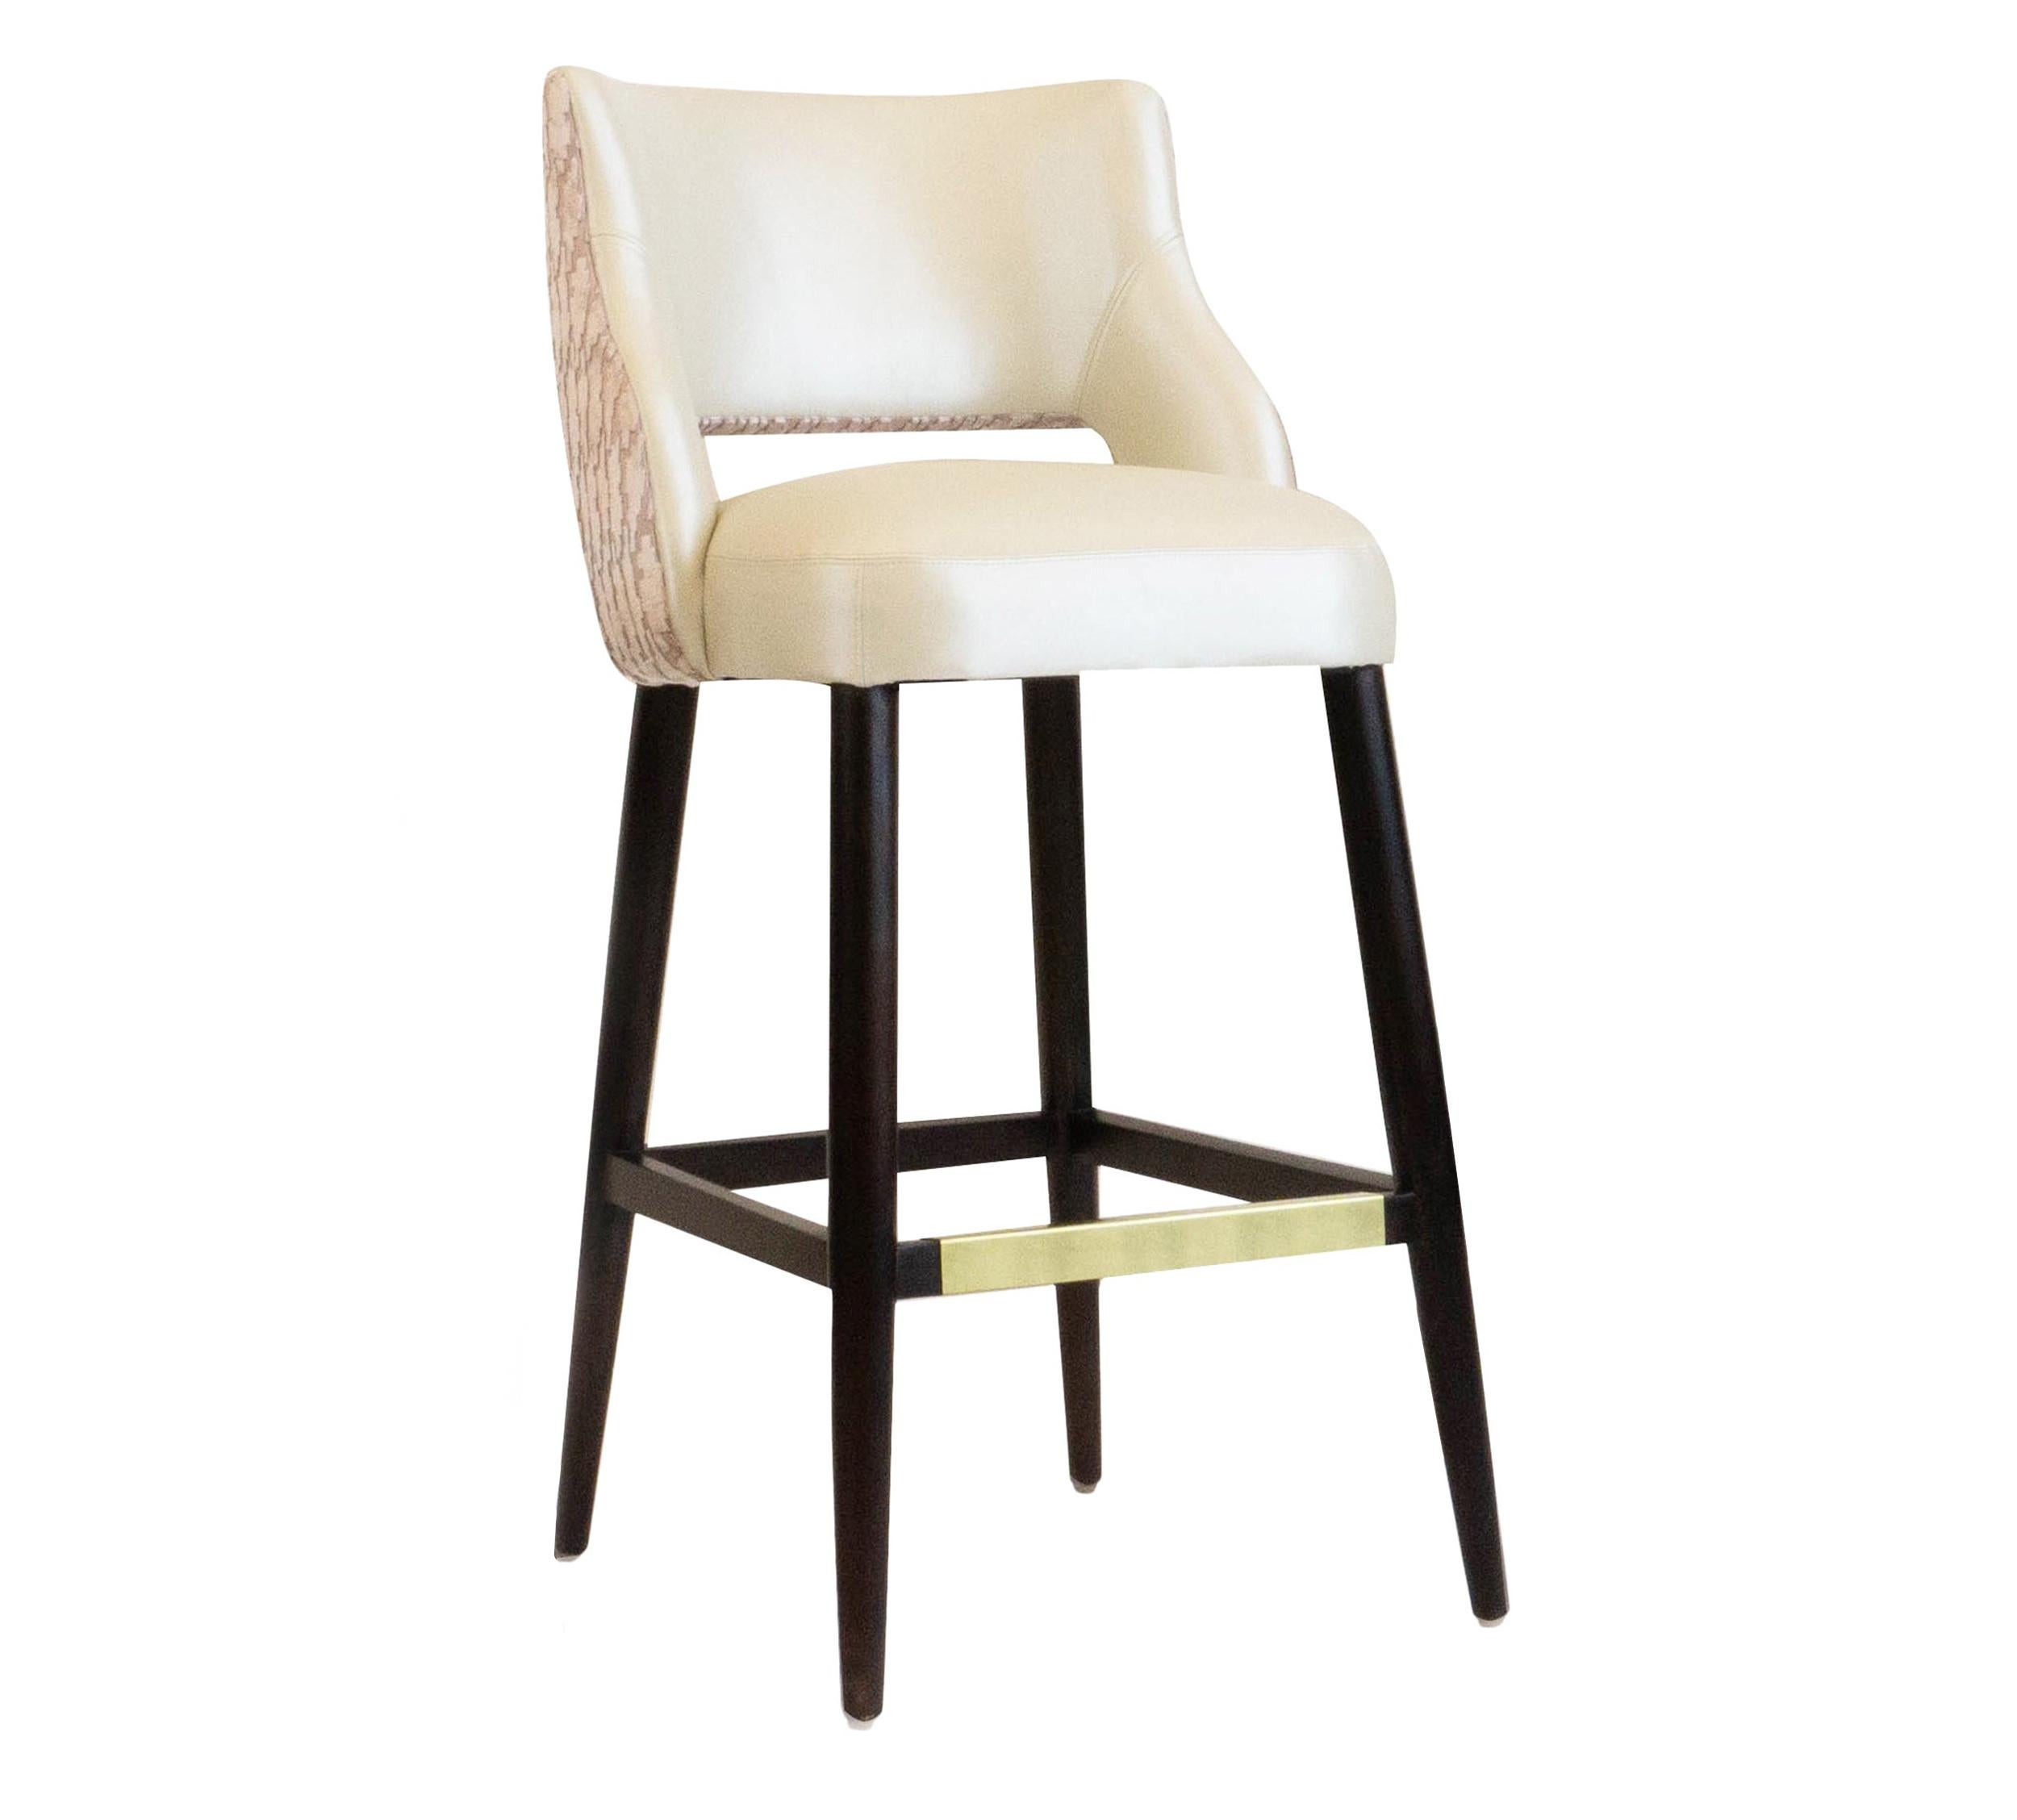 This armless bar or counter stool features a curvy and relaxed backrest. Upholstered in a shimmering vinyl with contrasting cut velvet on the back; the stool also features a brass kick. The bar stools are built to order and customization is